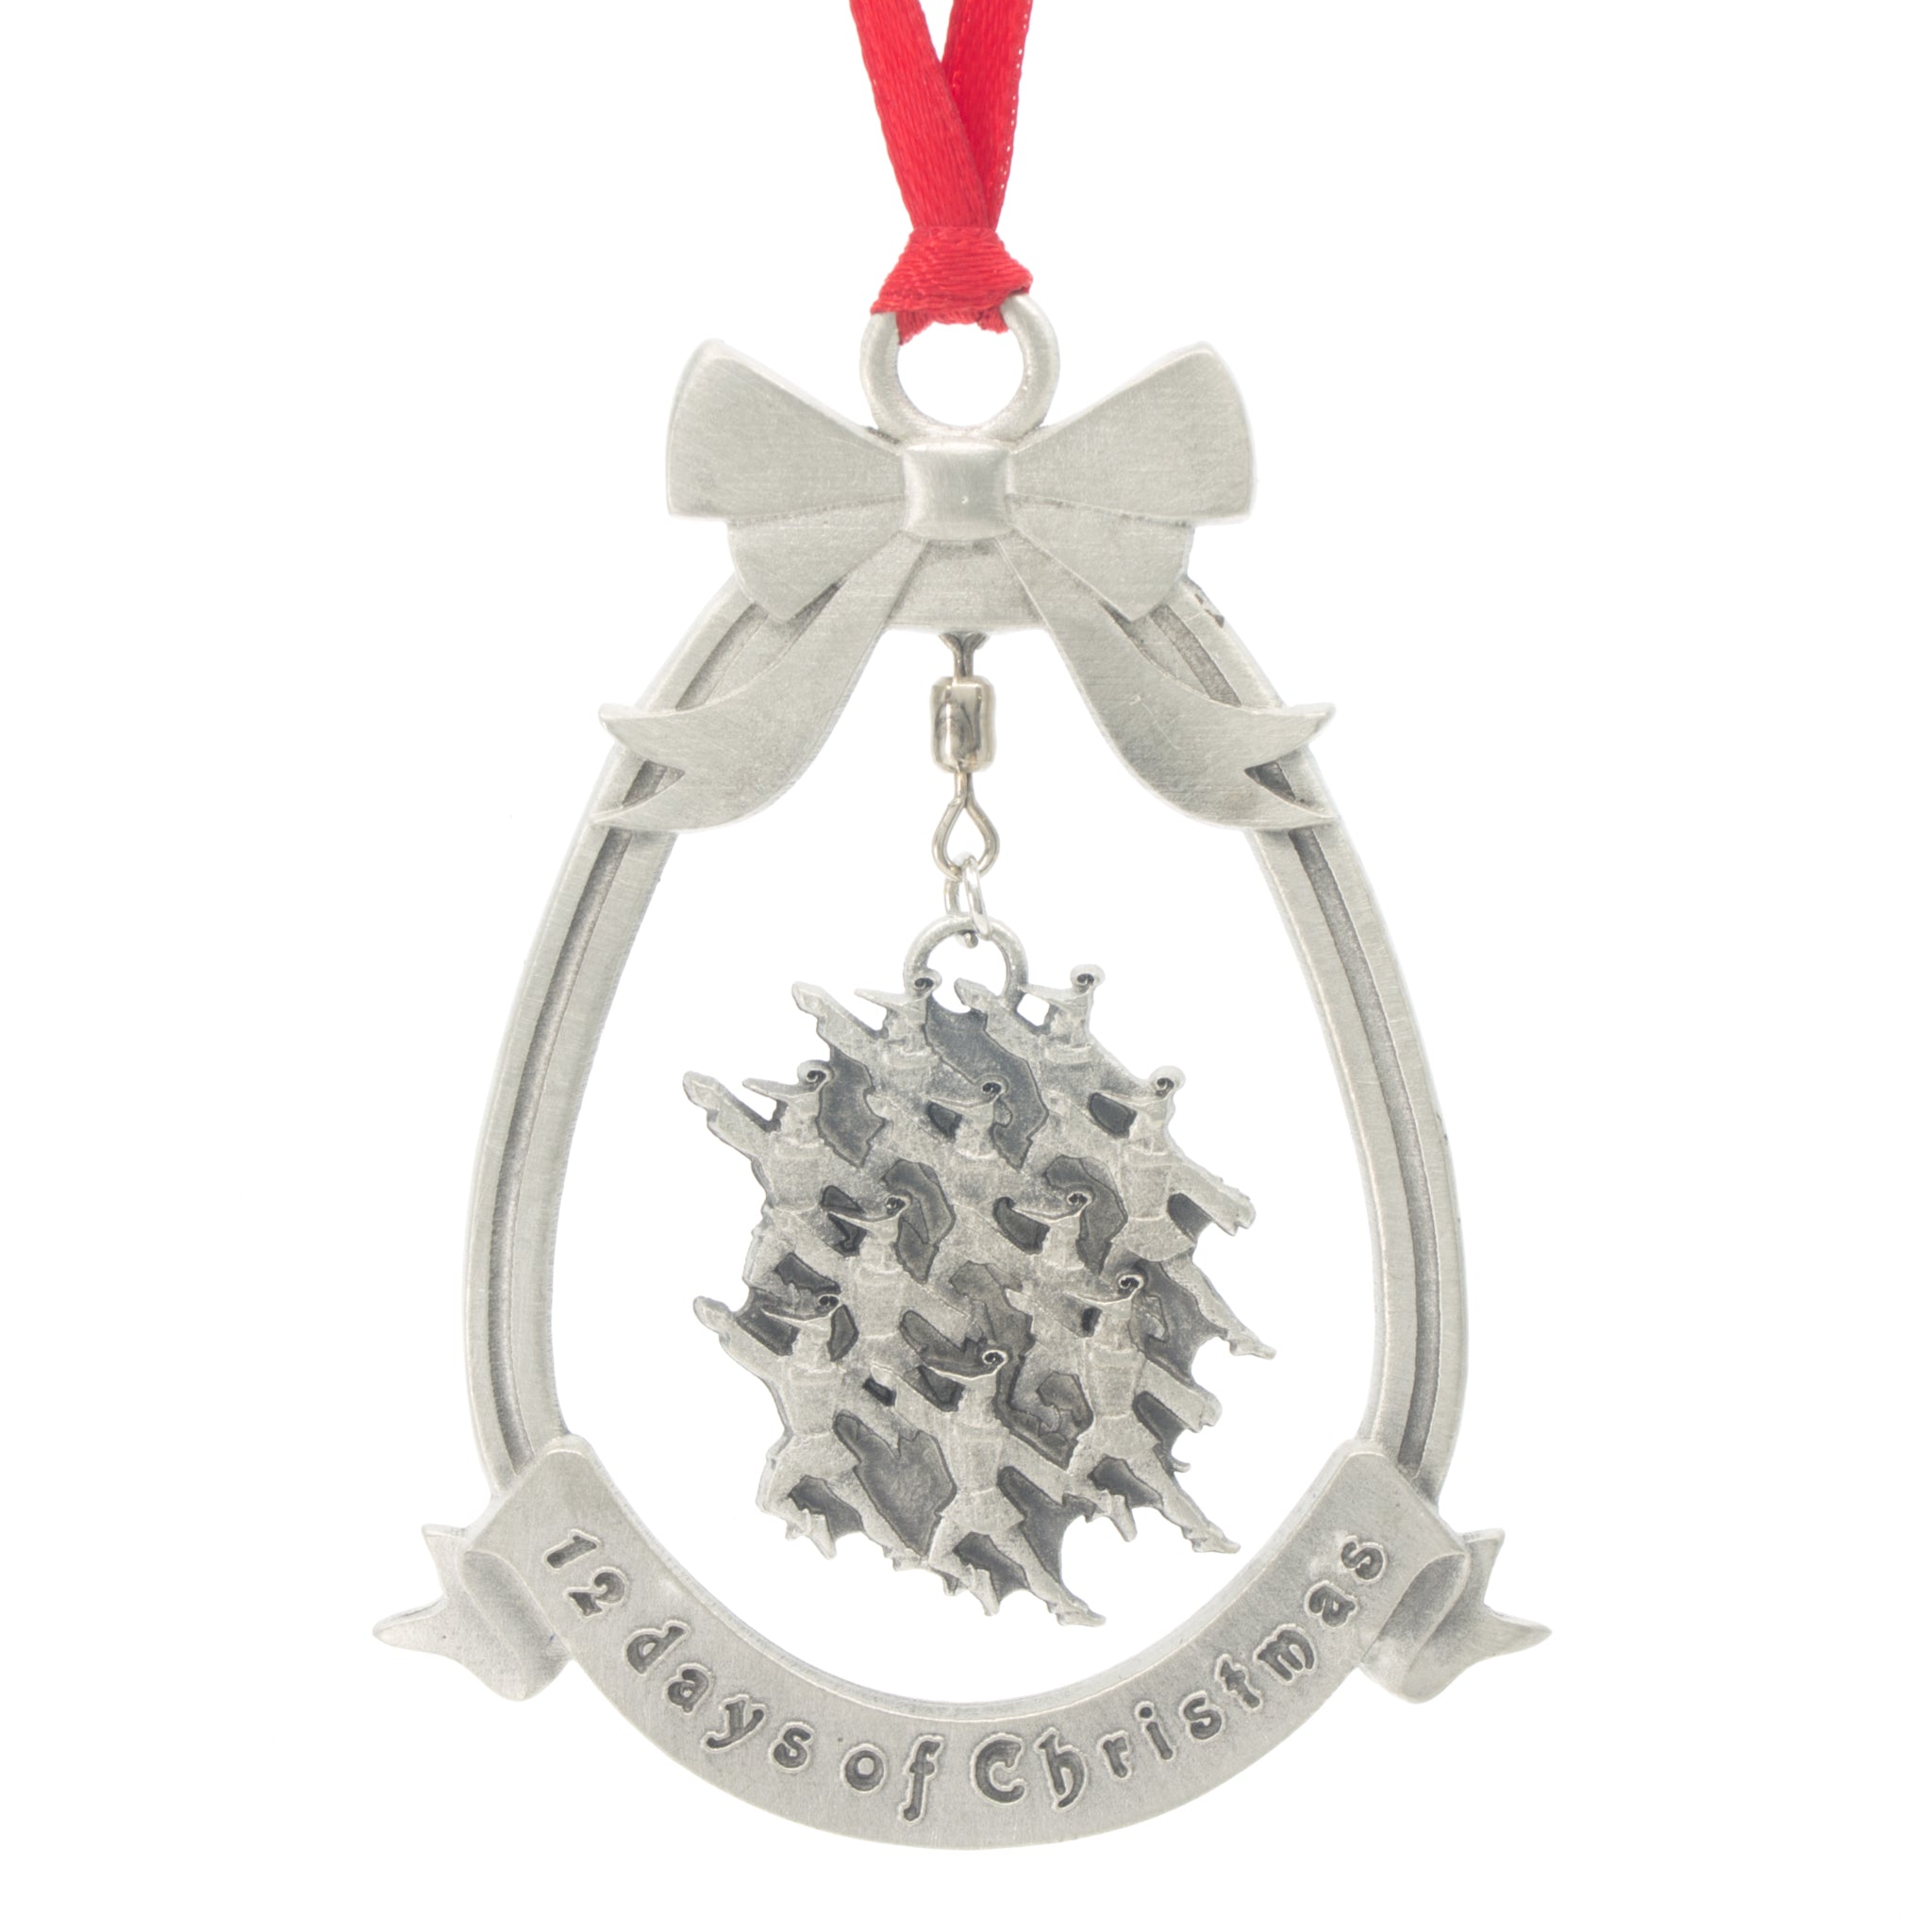 10 Lords A-Leaping – 12 Days of Christmas Ornament – Aitkens Pewter